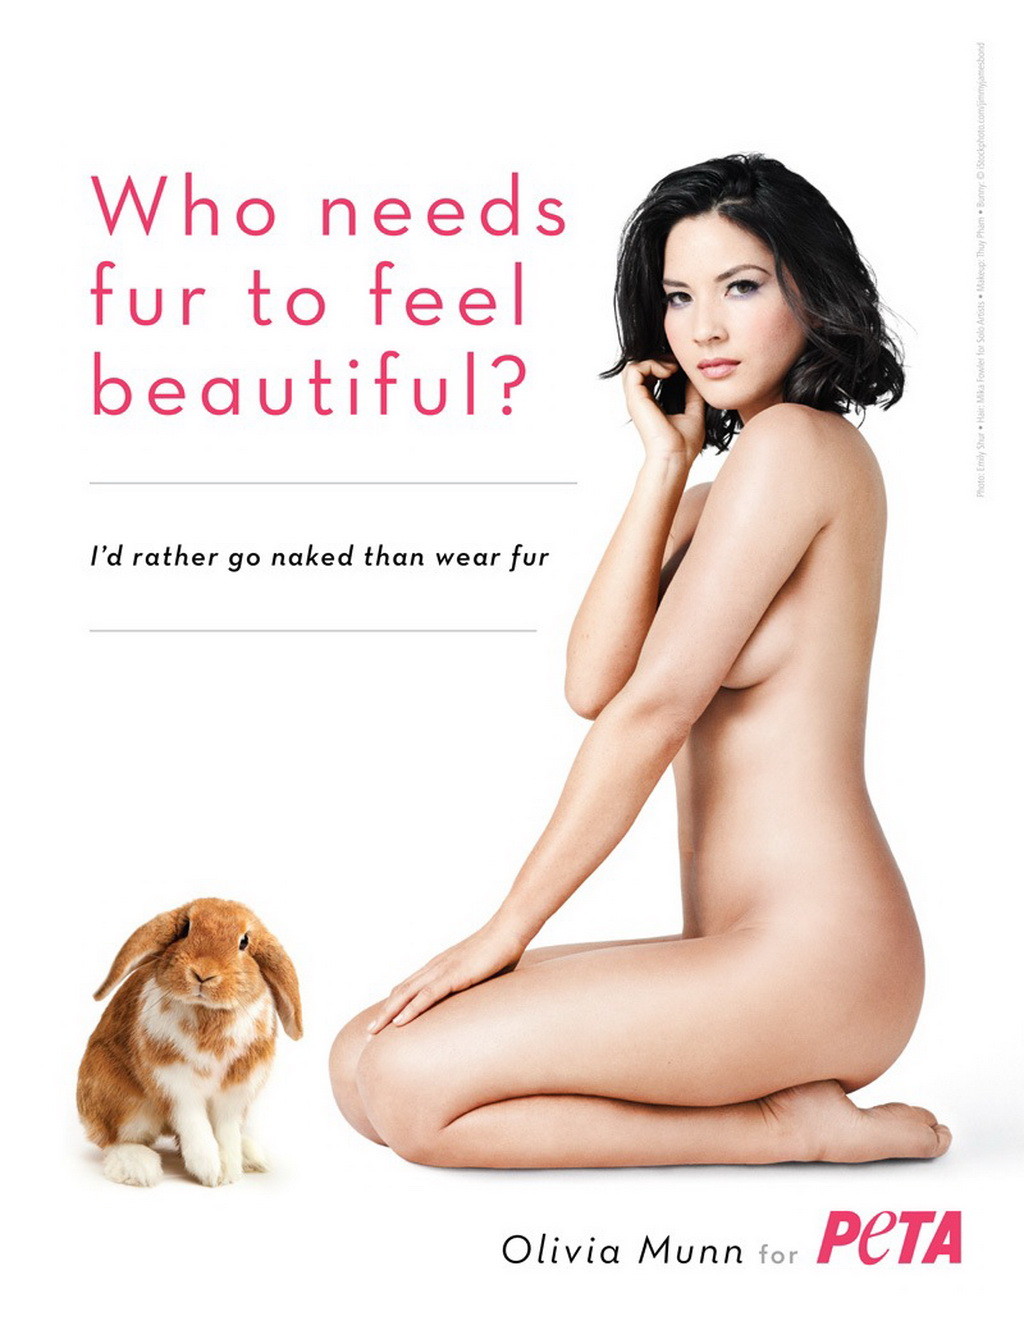 Olivia Munn fully nude but hiding for the new PETA ad campaign #75276548